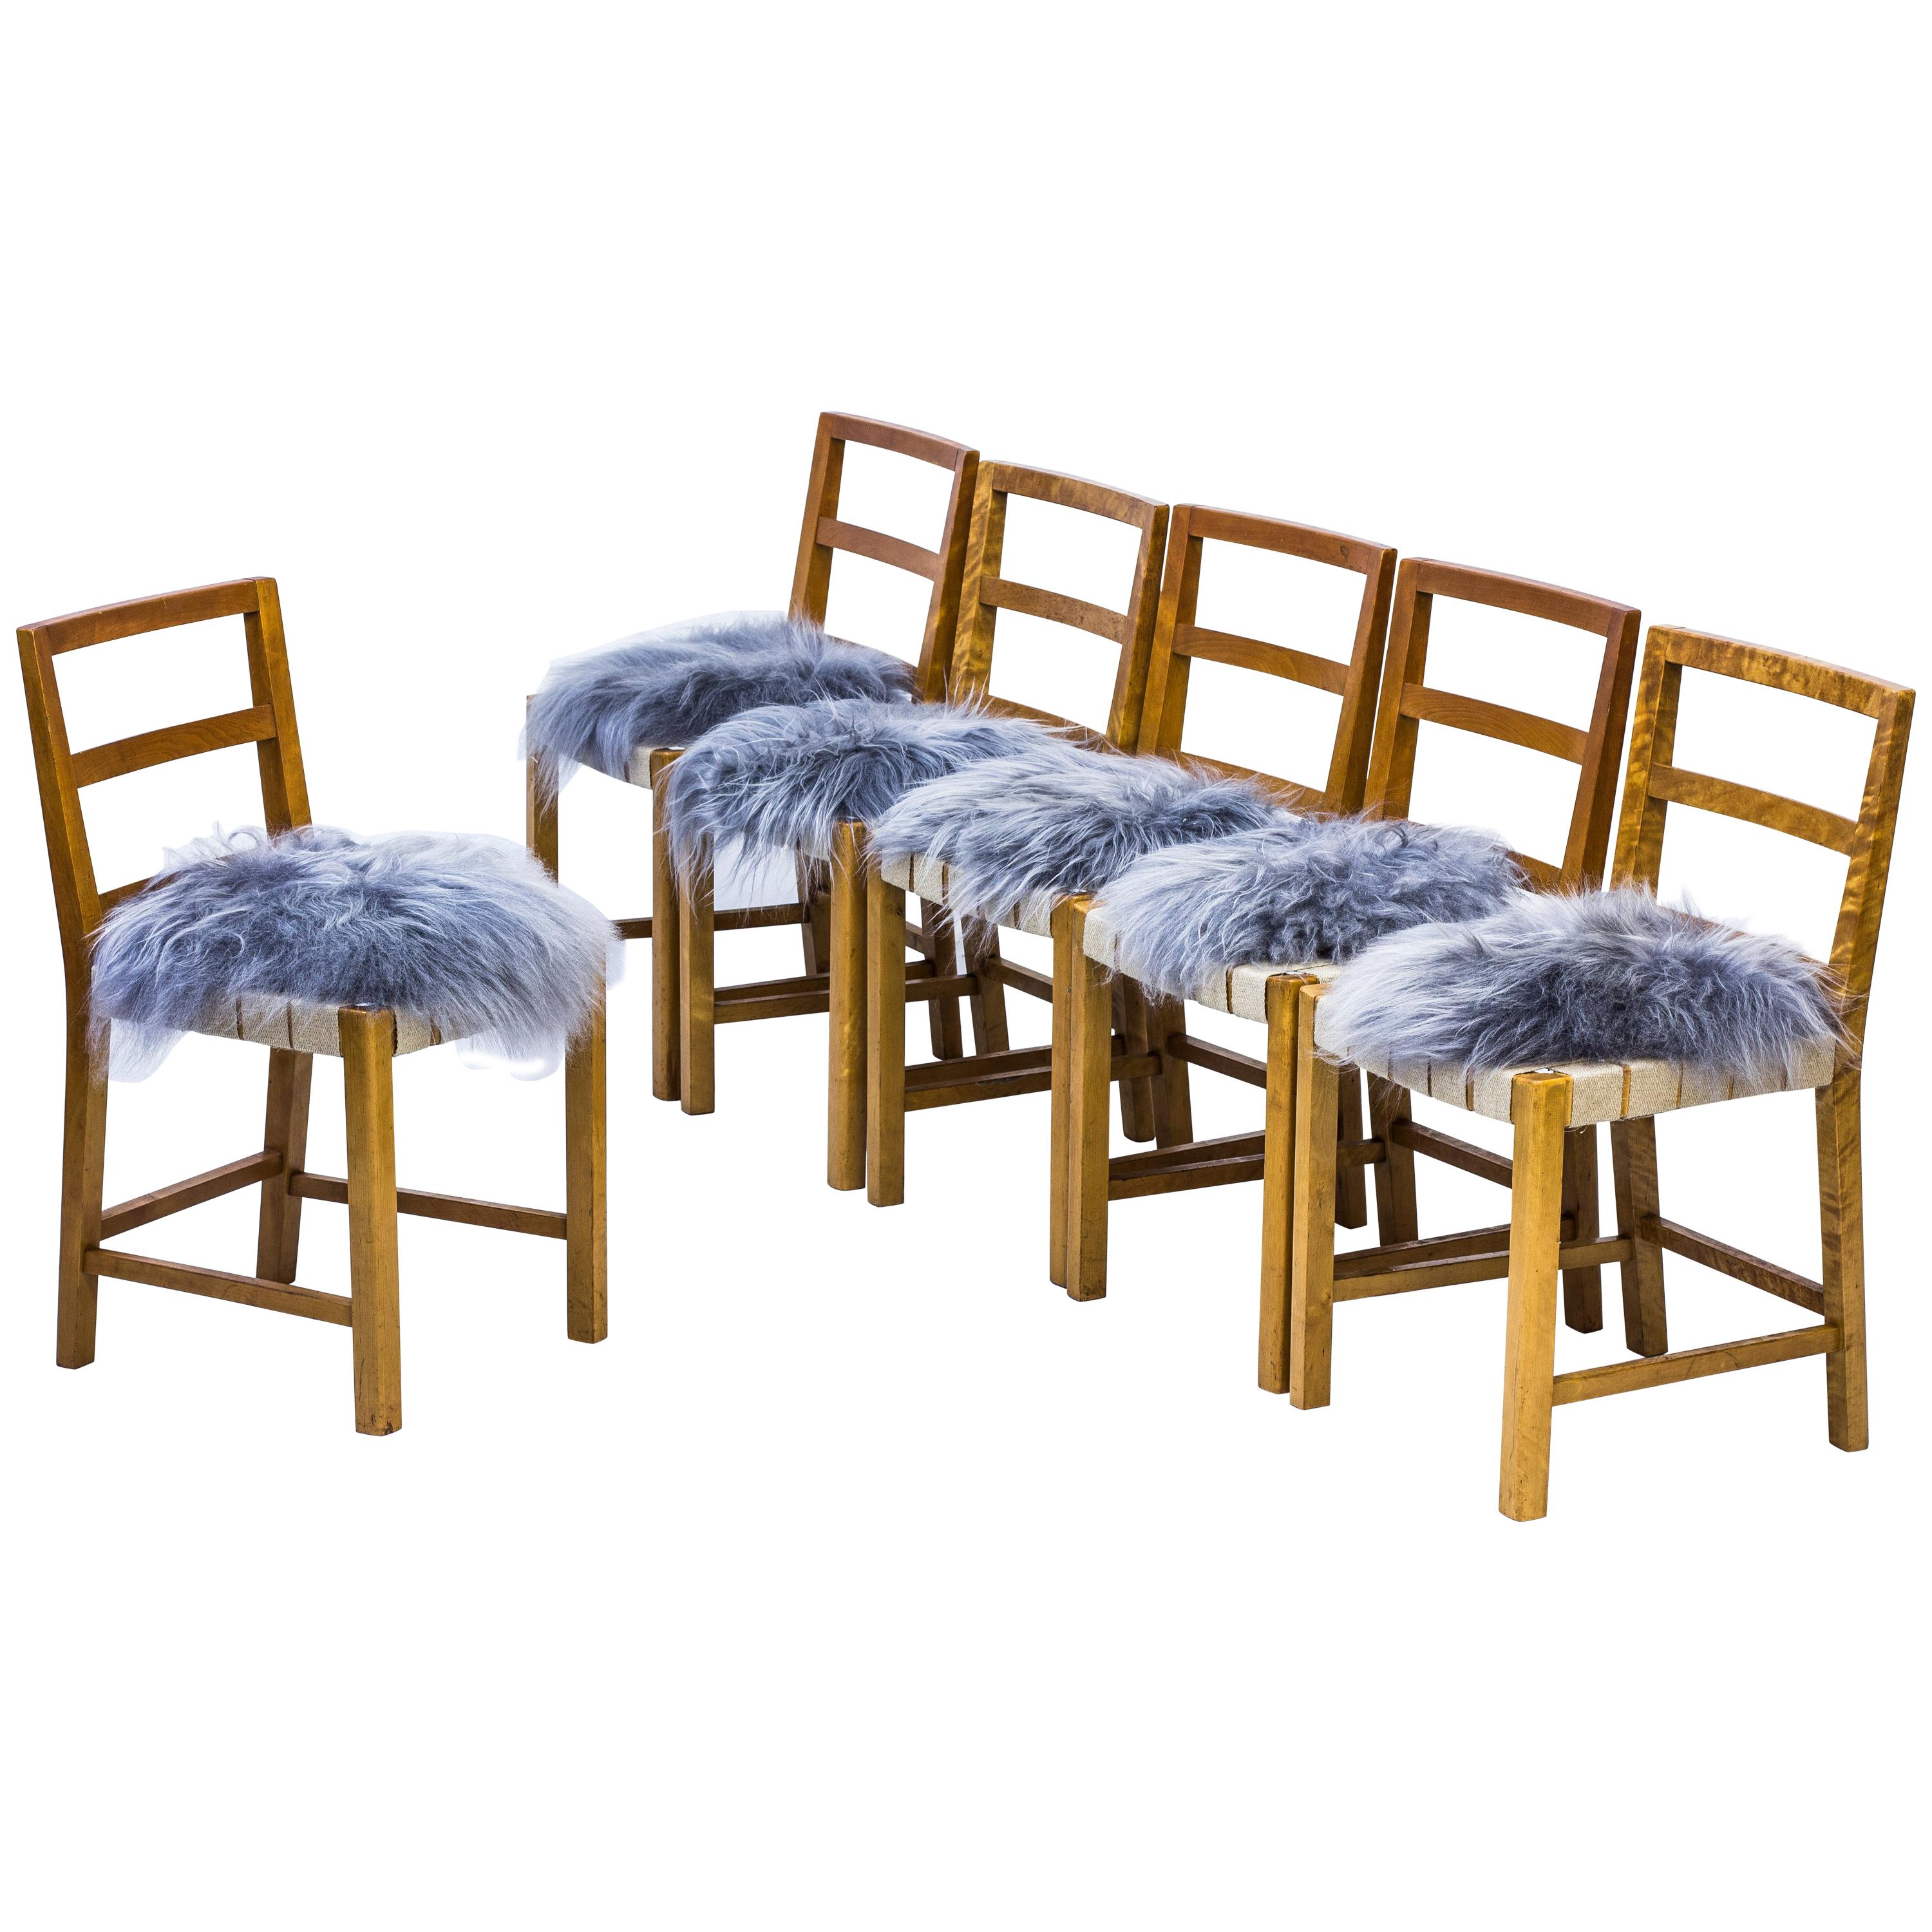 Set of Six Chairs by Uno Åhren for Gemla Fabrikers AB, Sweden, 1930s